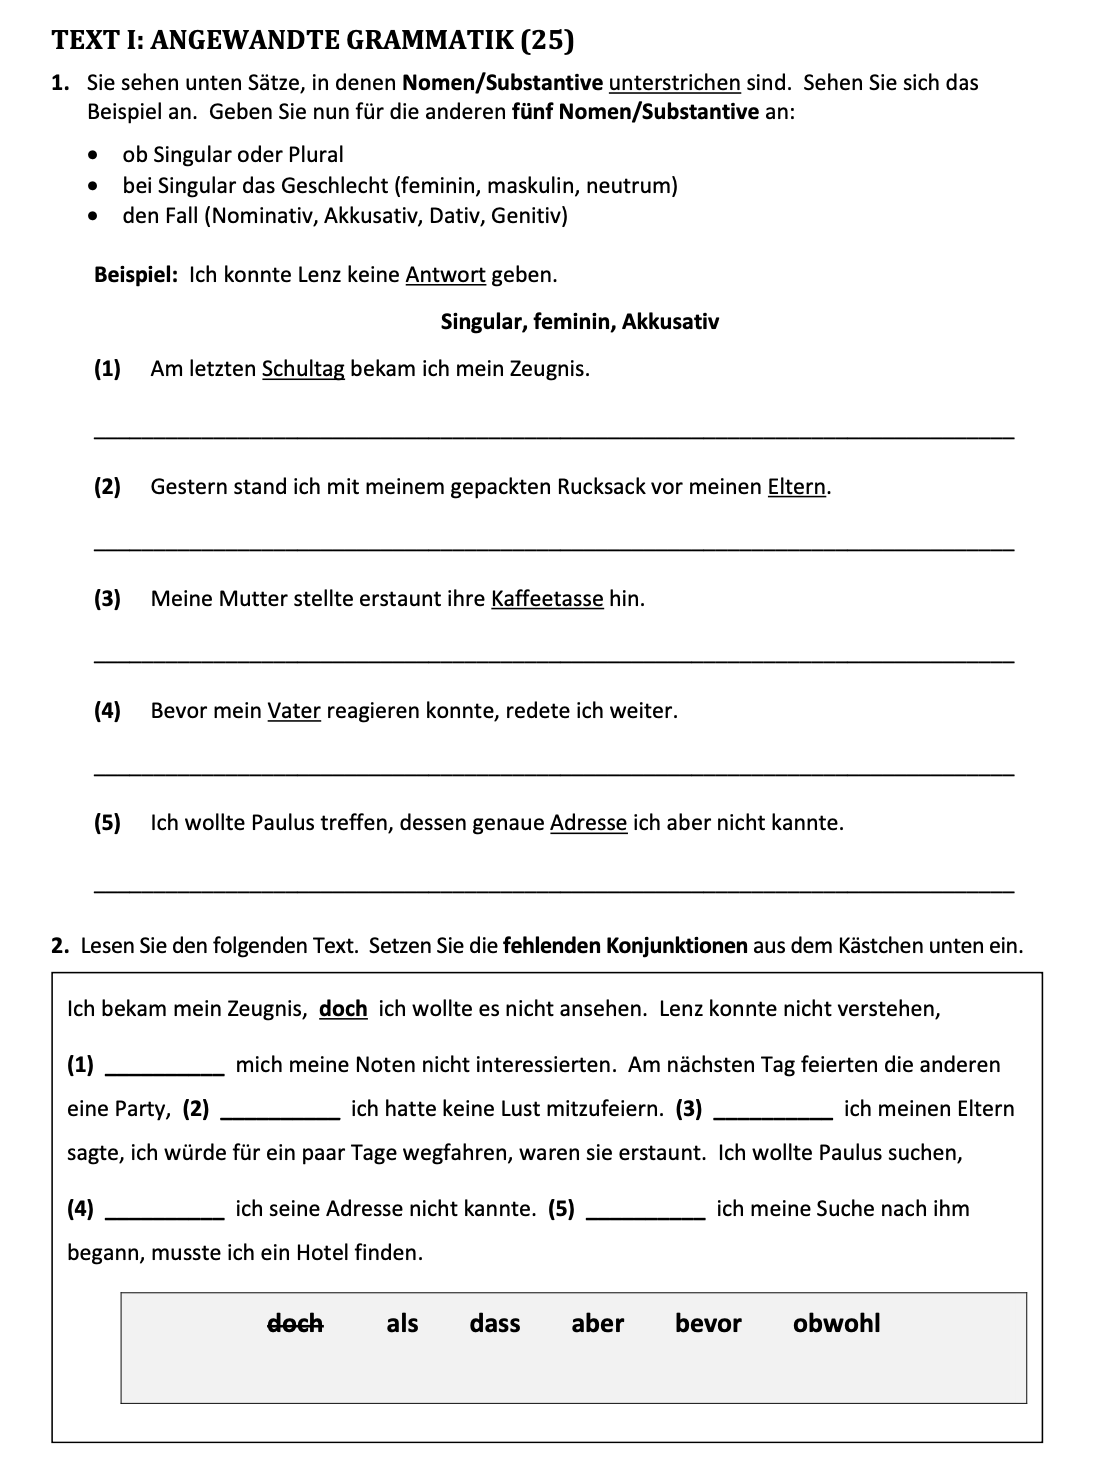 an image of the question 2020 Text I Angewandte Grammatik which is about the topic grammatik and the subject is Leaving Certificate german